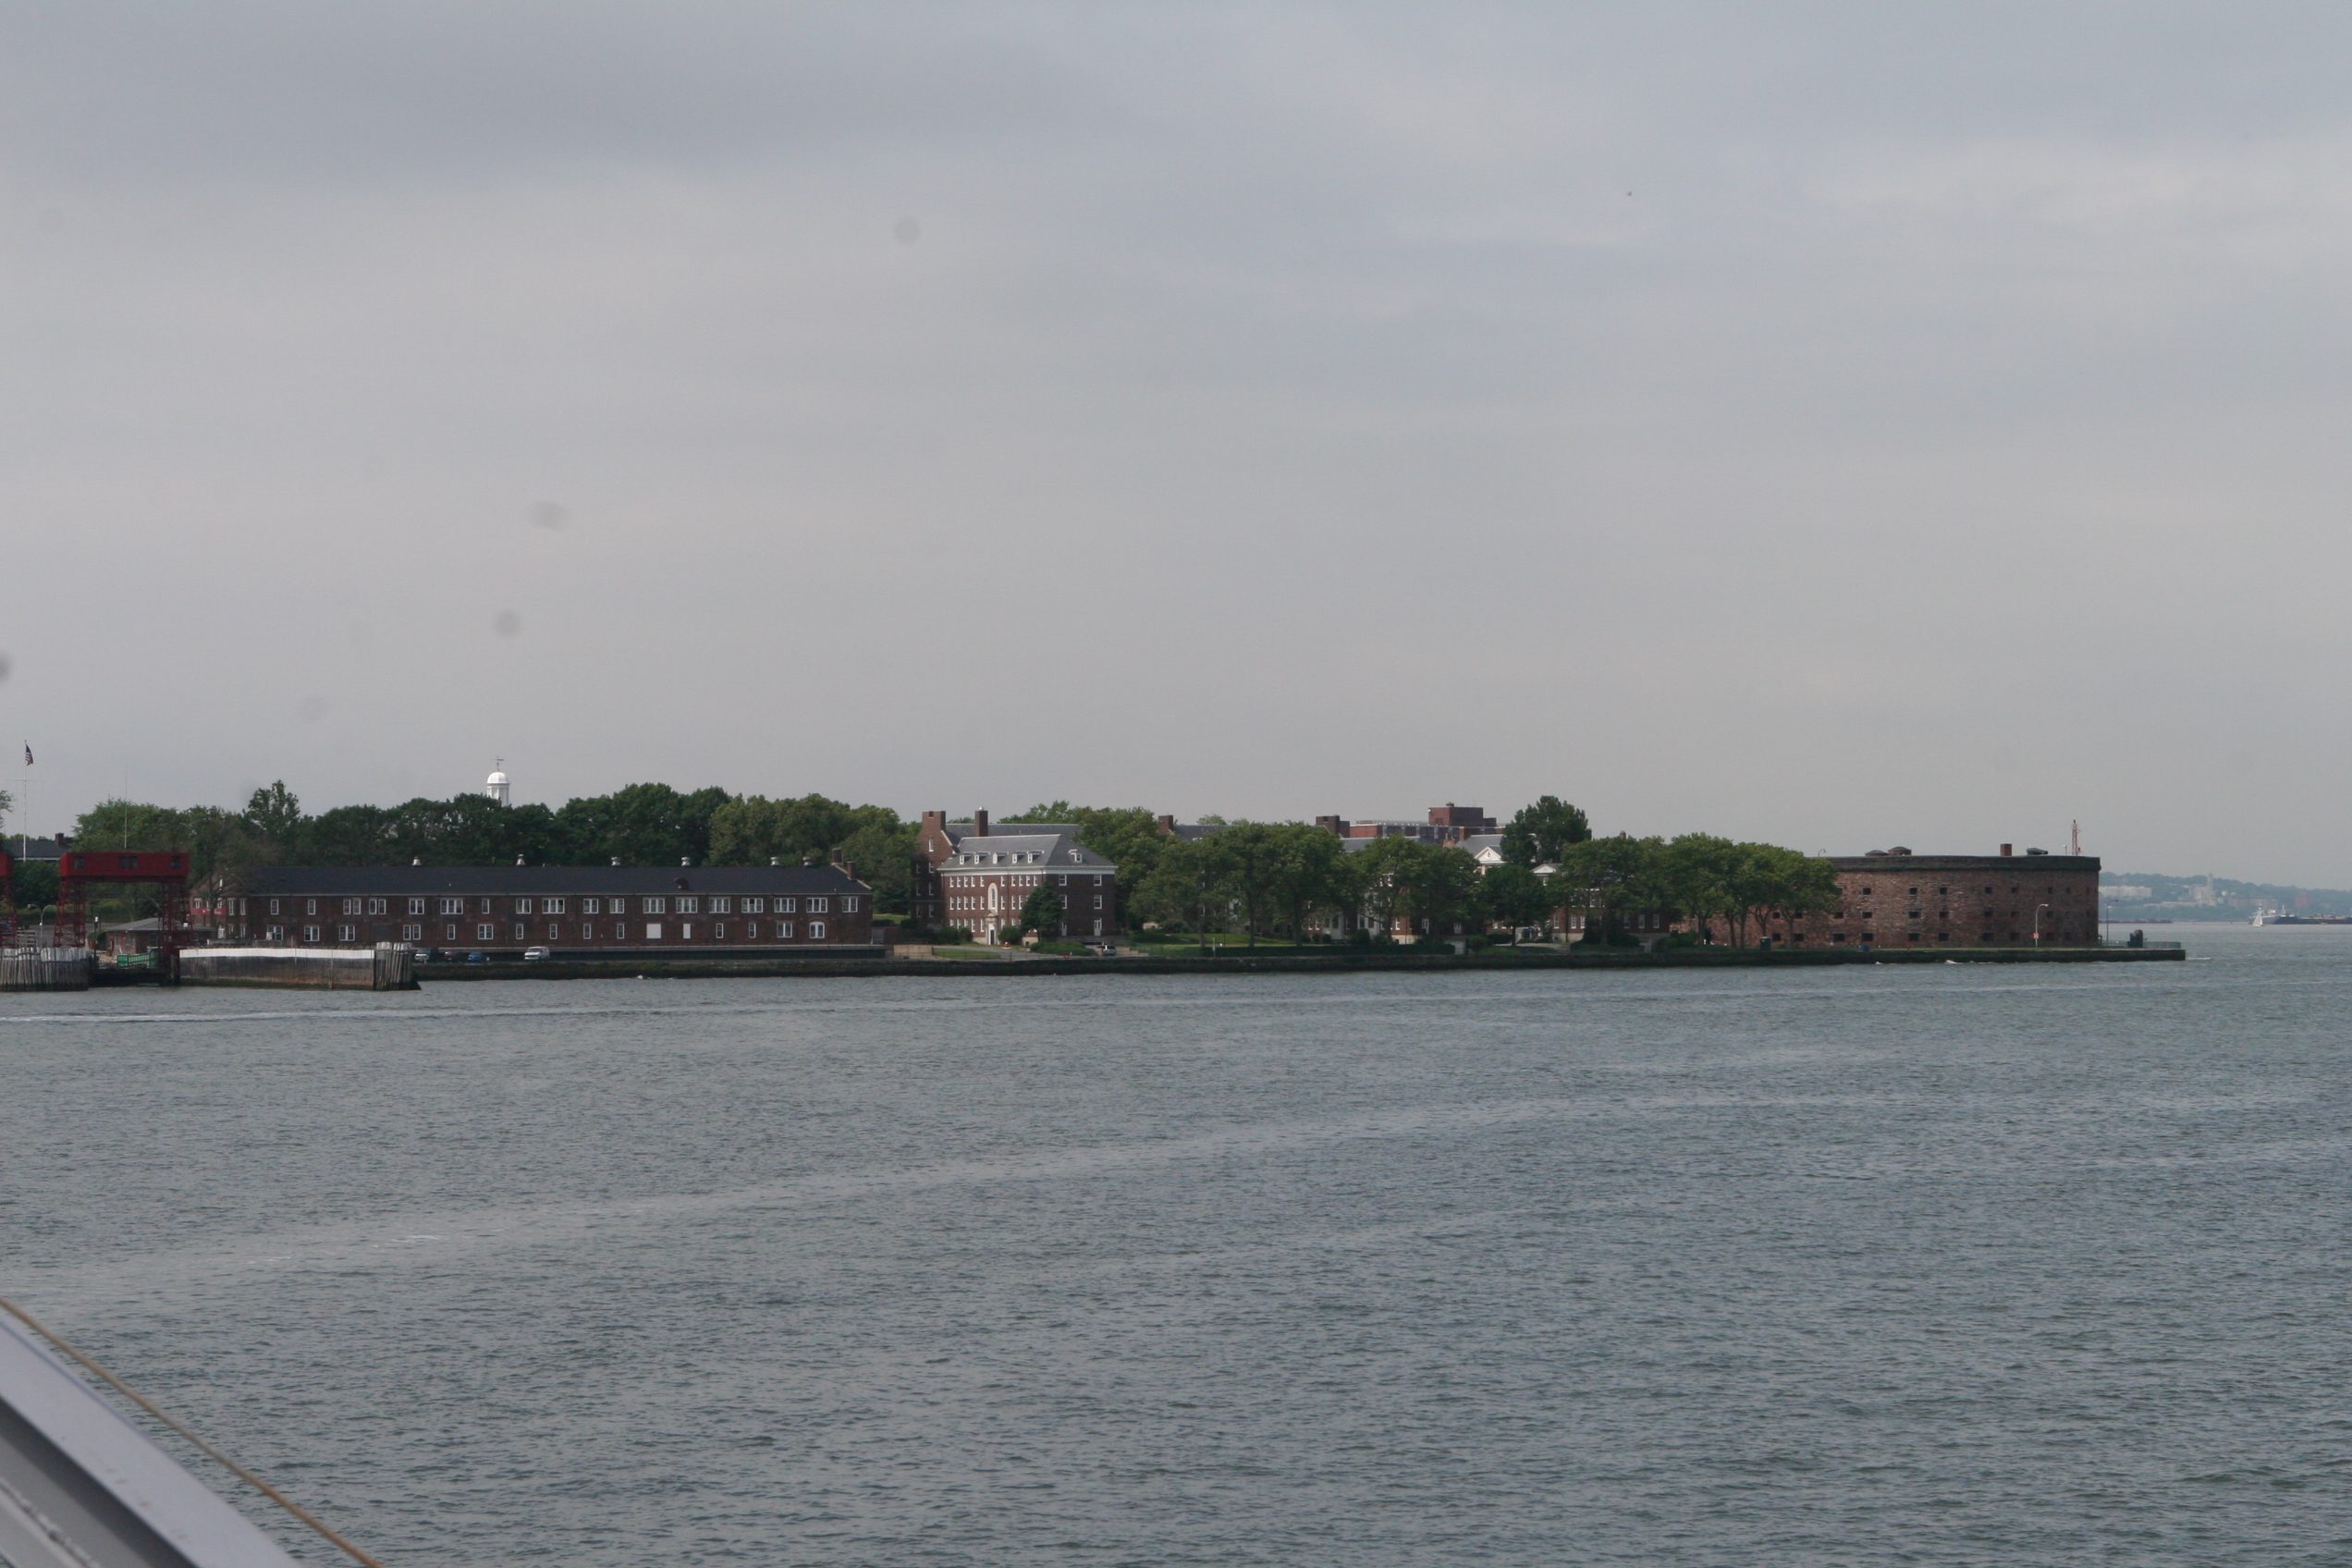 Governors Island from the Manhattan Ferry